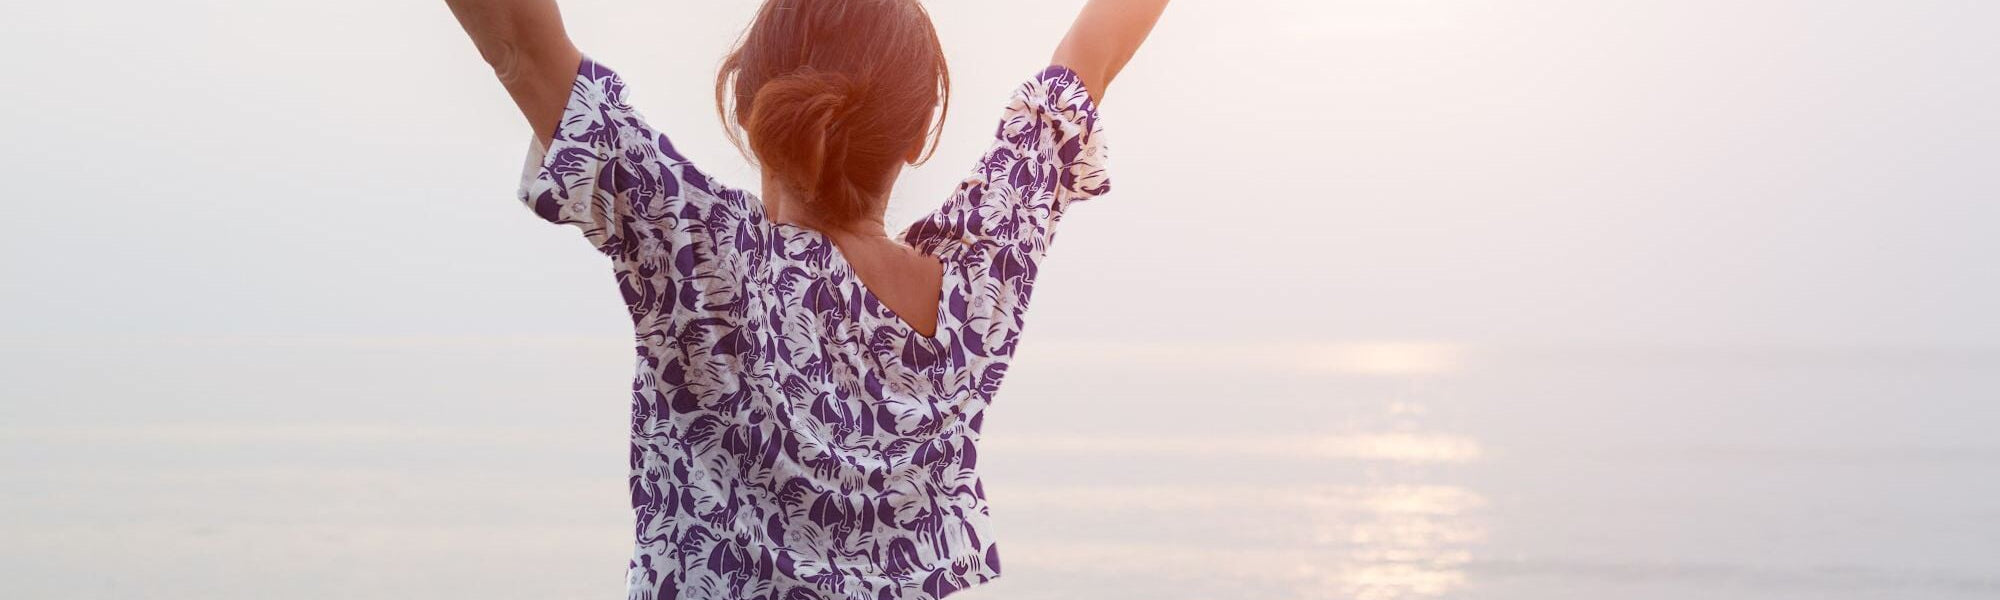 A girl wearing a fantasy printed shirt stands in the sun, looking out over the ocean. The unique design of the white button up shirt features fantastical purple dragons.